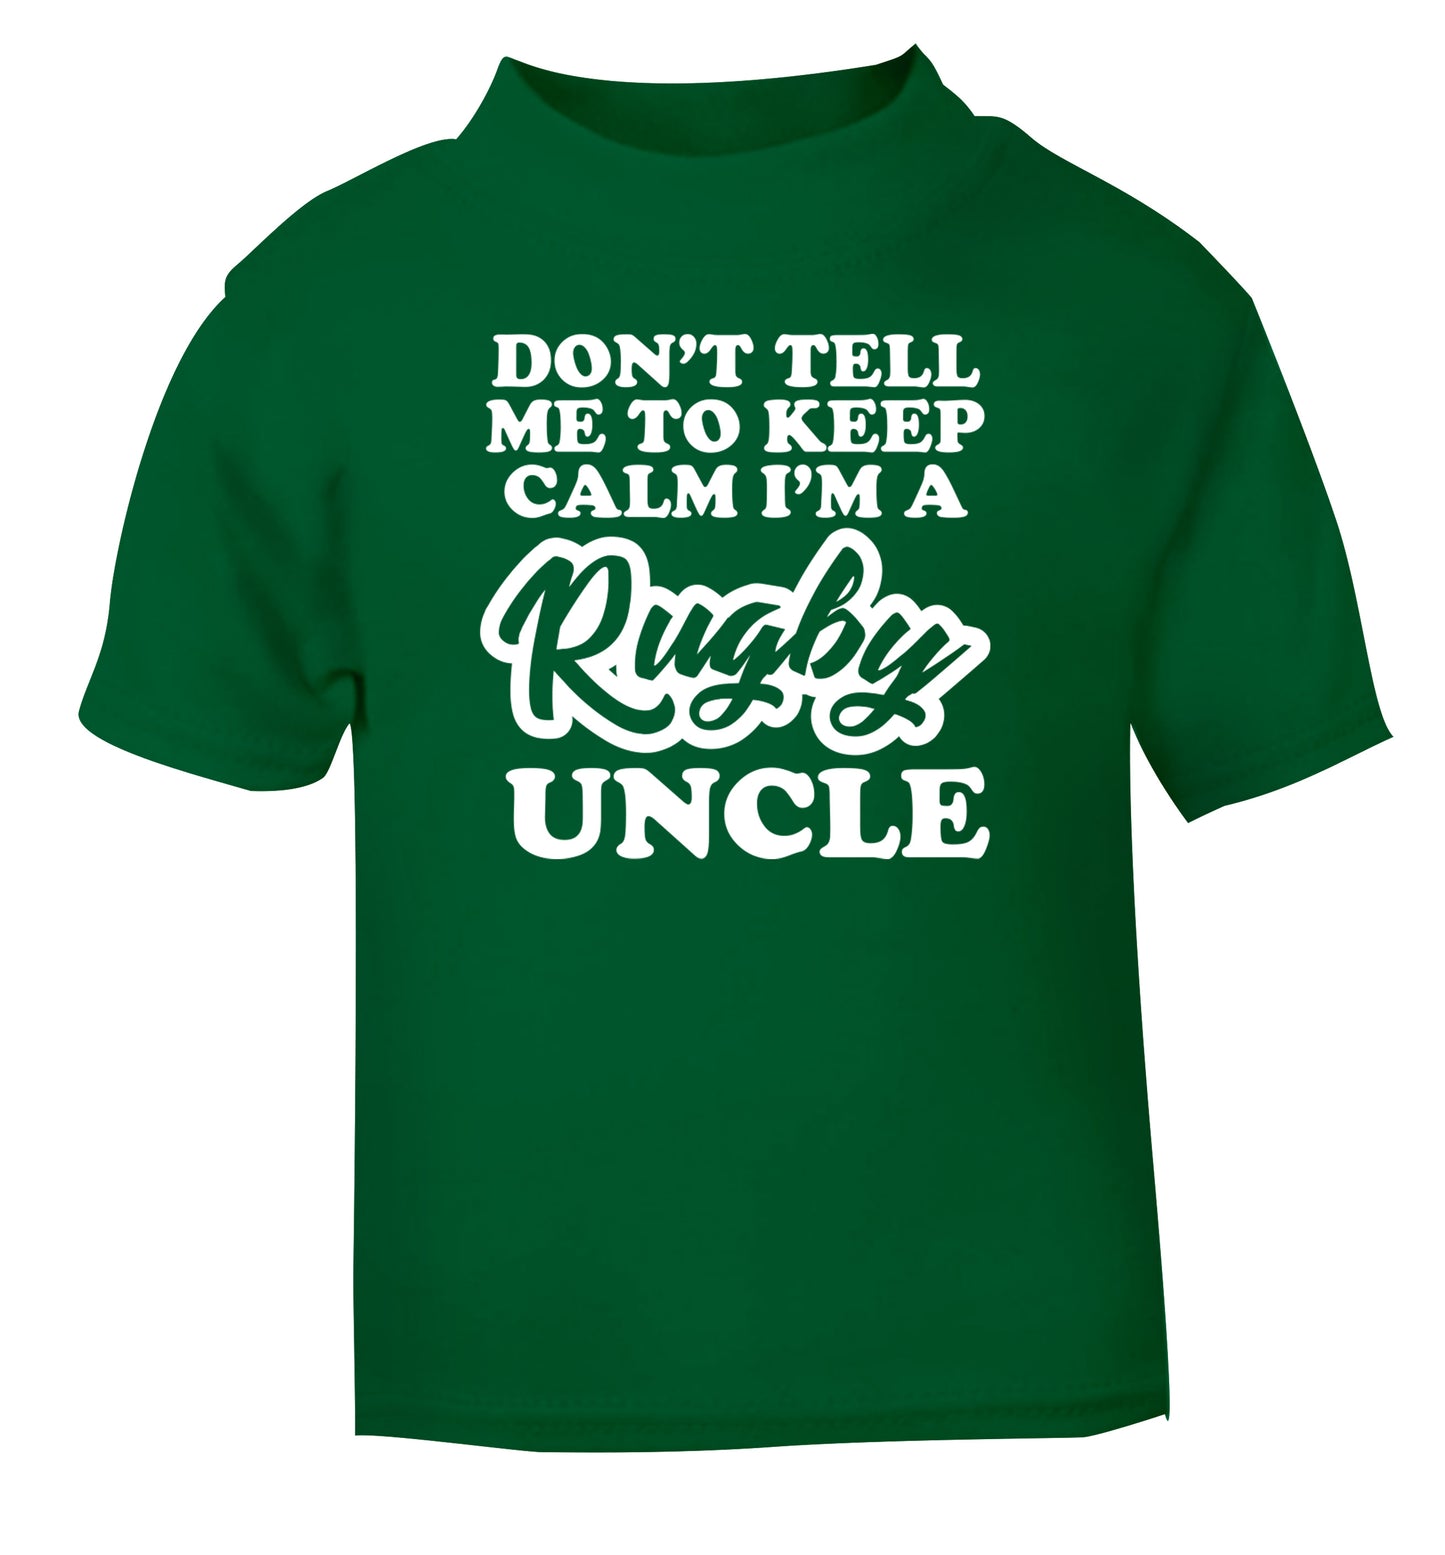 Don't tell me to keep calm I'm a rugby uncle green Baby Toddler Tshirt 2 Years